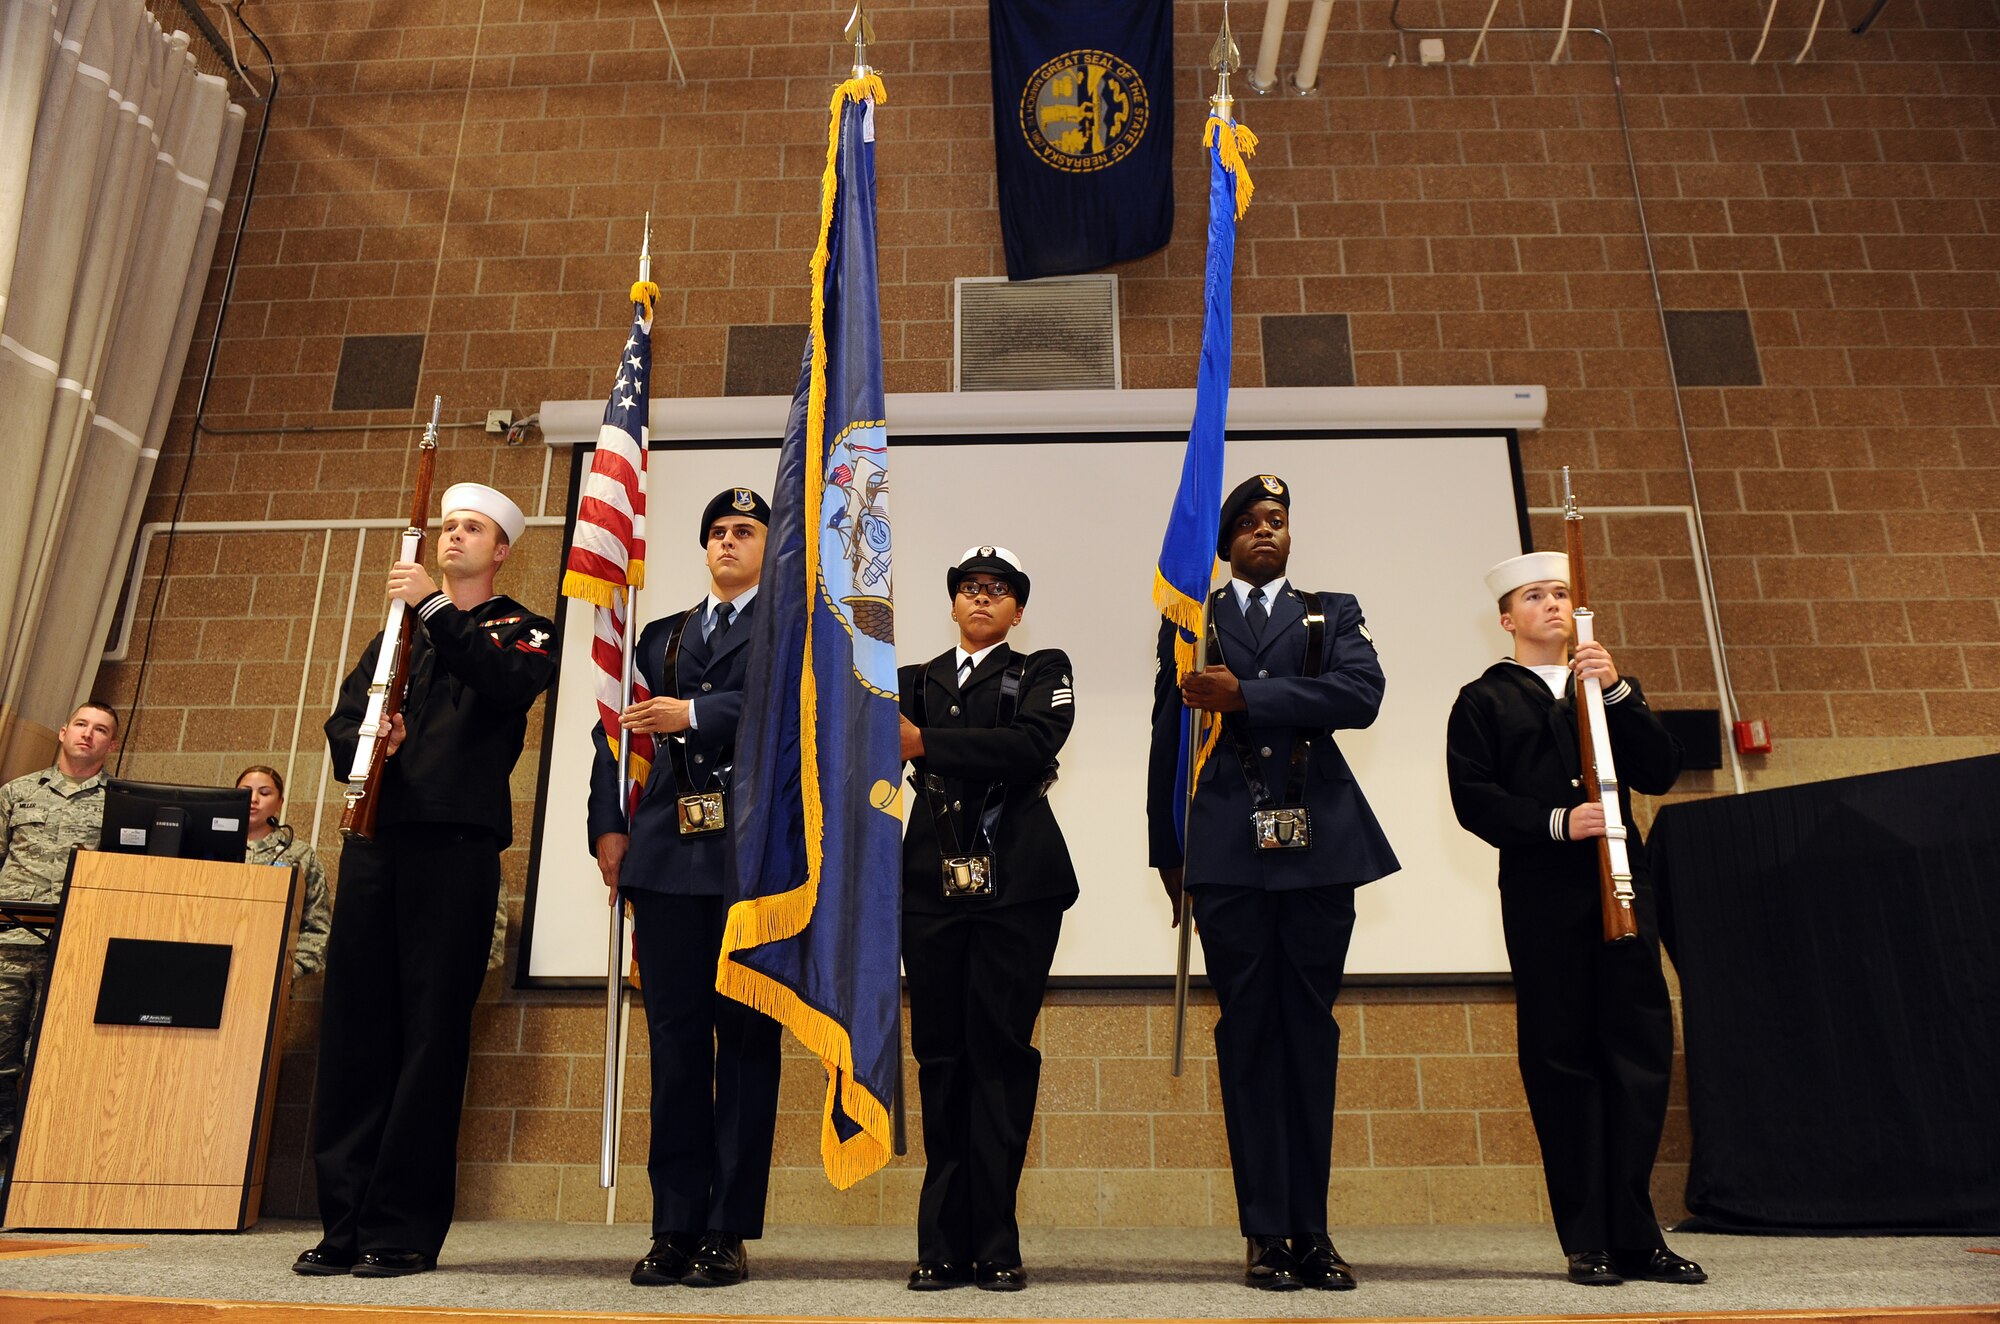 A color guard made up of Sailors and Airman from the 55th Security Forces Squadron post the colors at a memorial service held in the guard mount room of the 55th SFS building on Offutt Air Force Base, Neb., Sept. 28.  The annual memorial service honors those who’ve given all during Operations ENDURING FREEDOM and IRAQI FREEDOM.  Several family members were also in attendance to unveil a memorial dedicated to their lost loved ones.  (U.S. Air Force photo by Josh Plueger/Released)